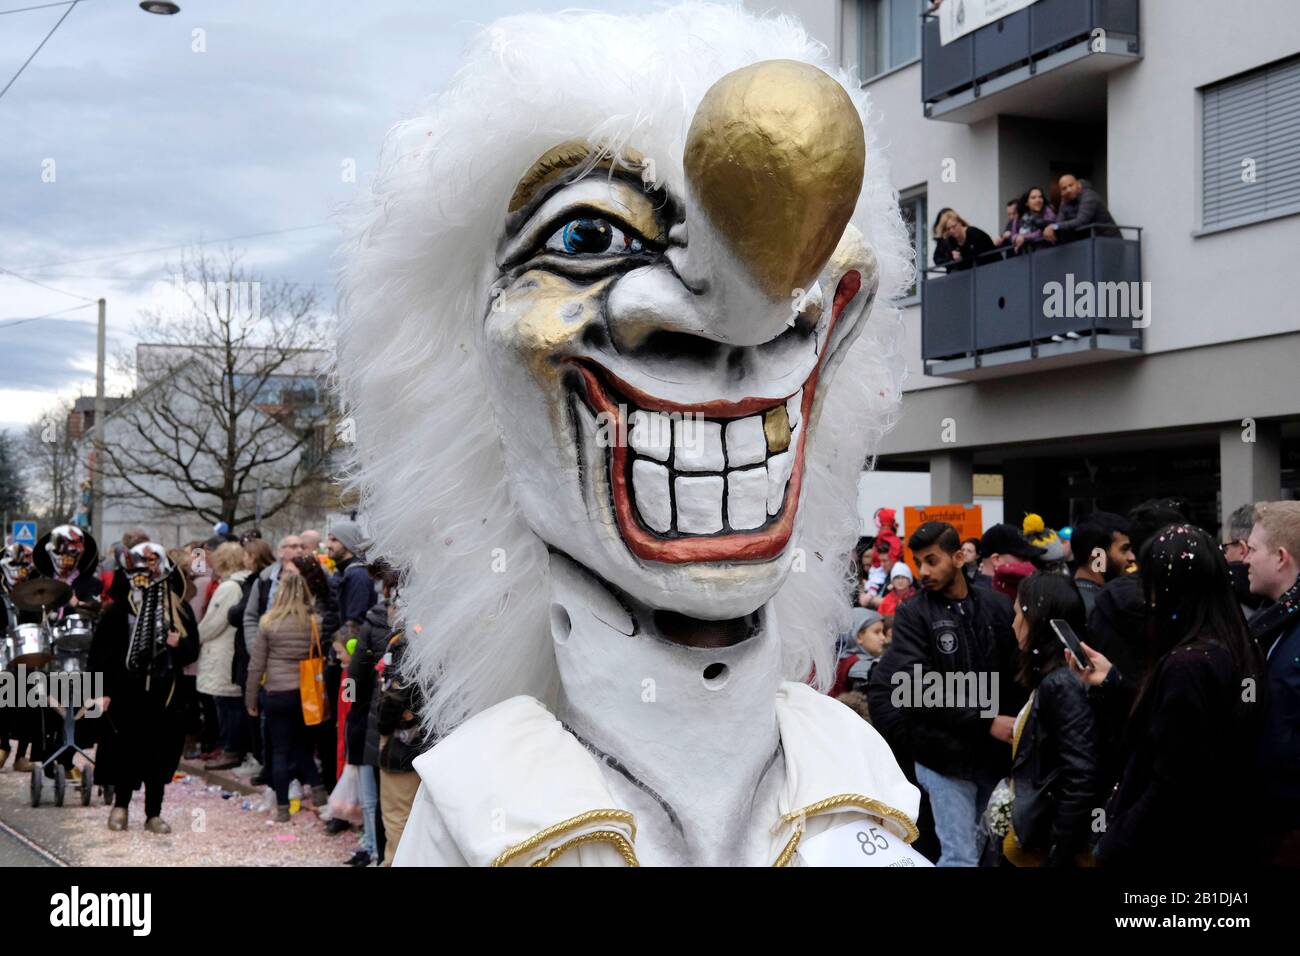 A participant wearing a mask at the carnival in Allschwil, Basel landschaft, Switzerland Stock Photo